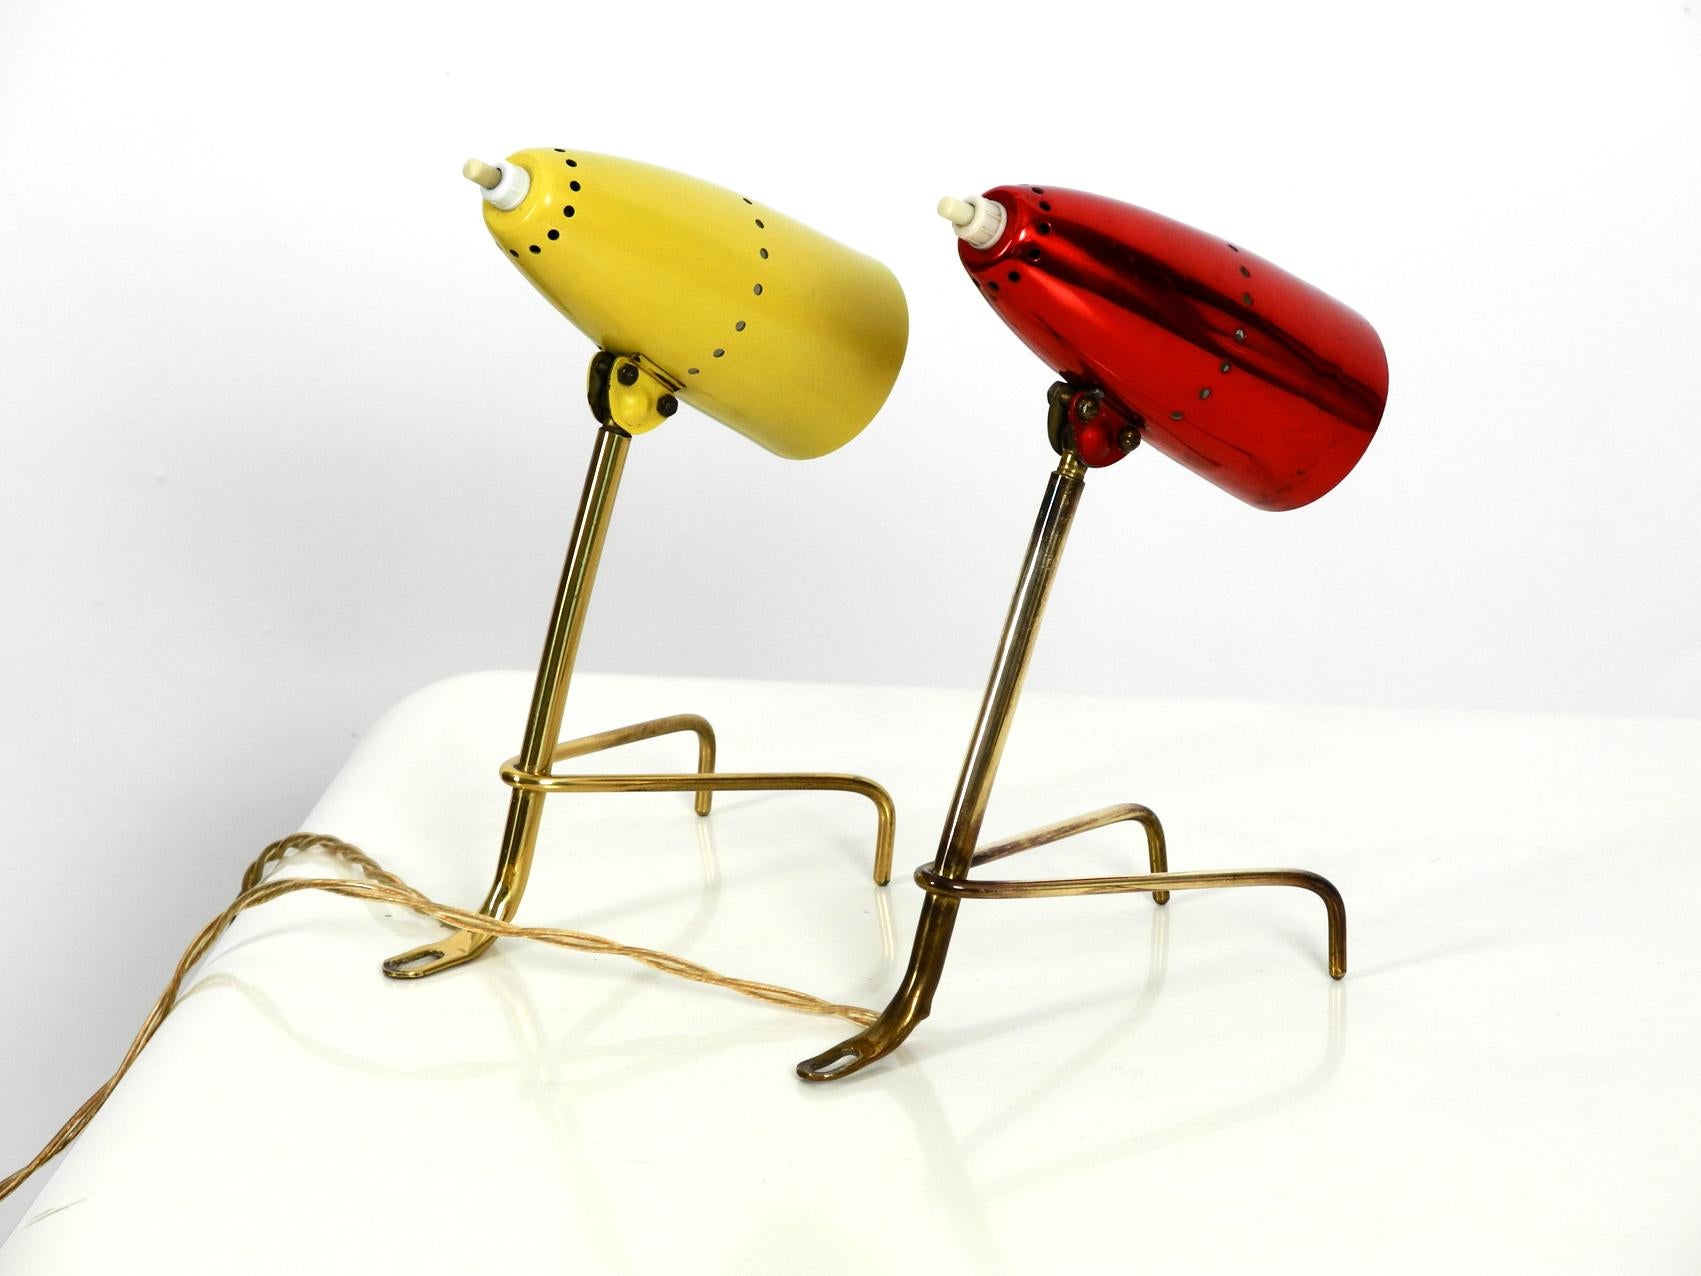 Mid-20th Century Stunning Pair of Mid-Century Modern Brass Crowfoot Table Lamps, Made in Austria